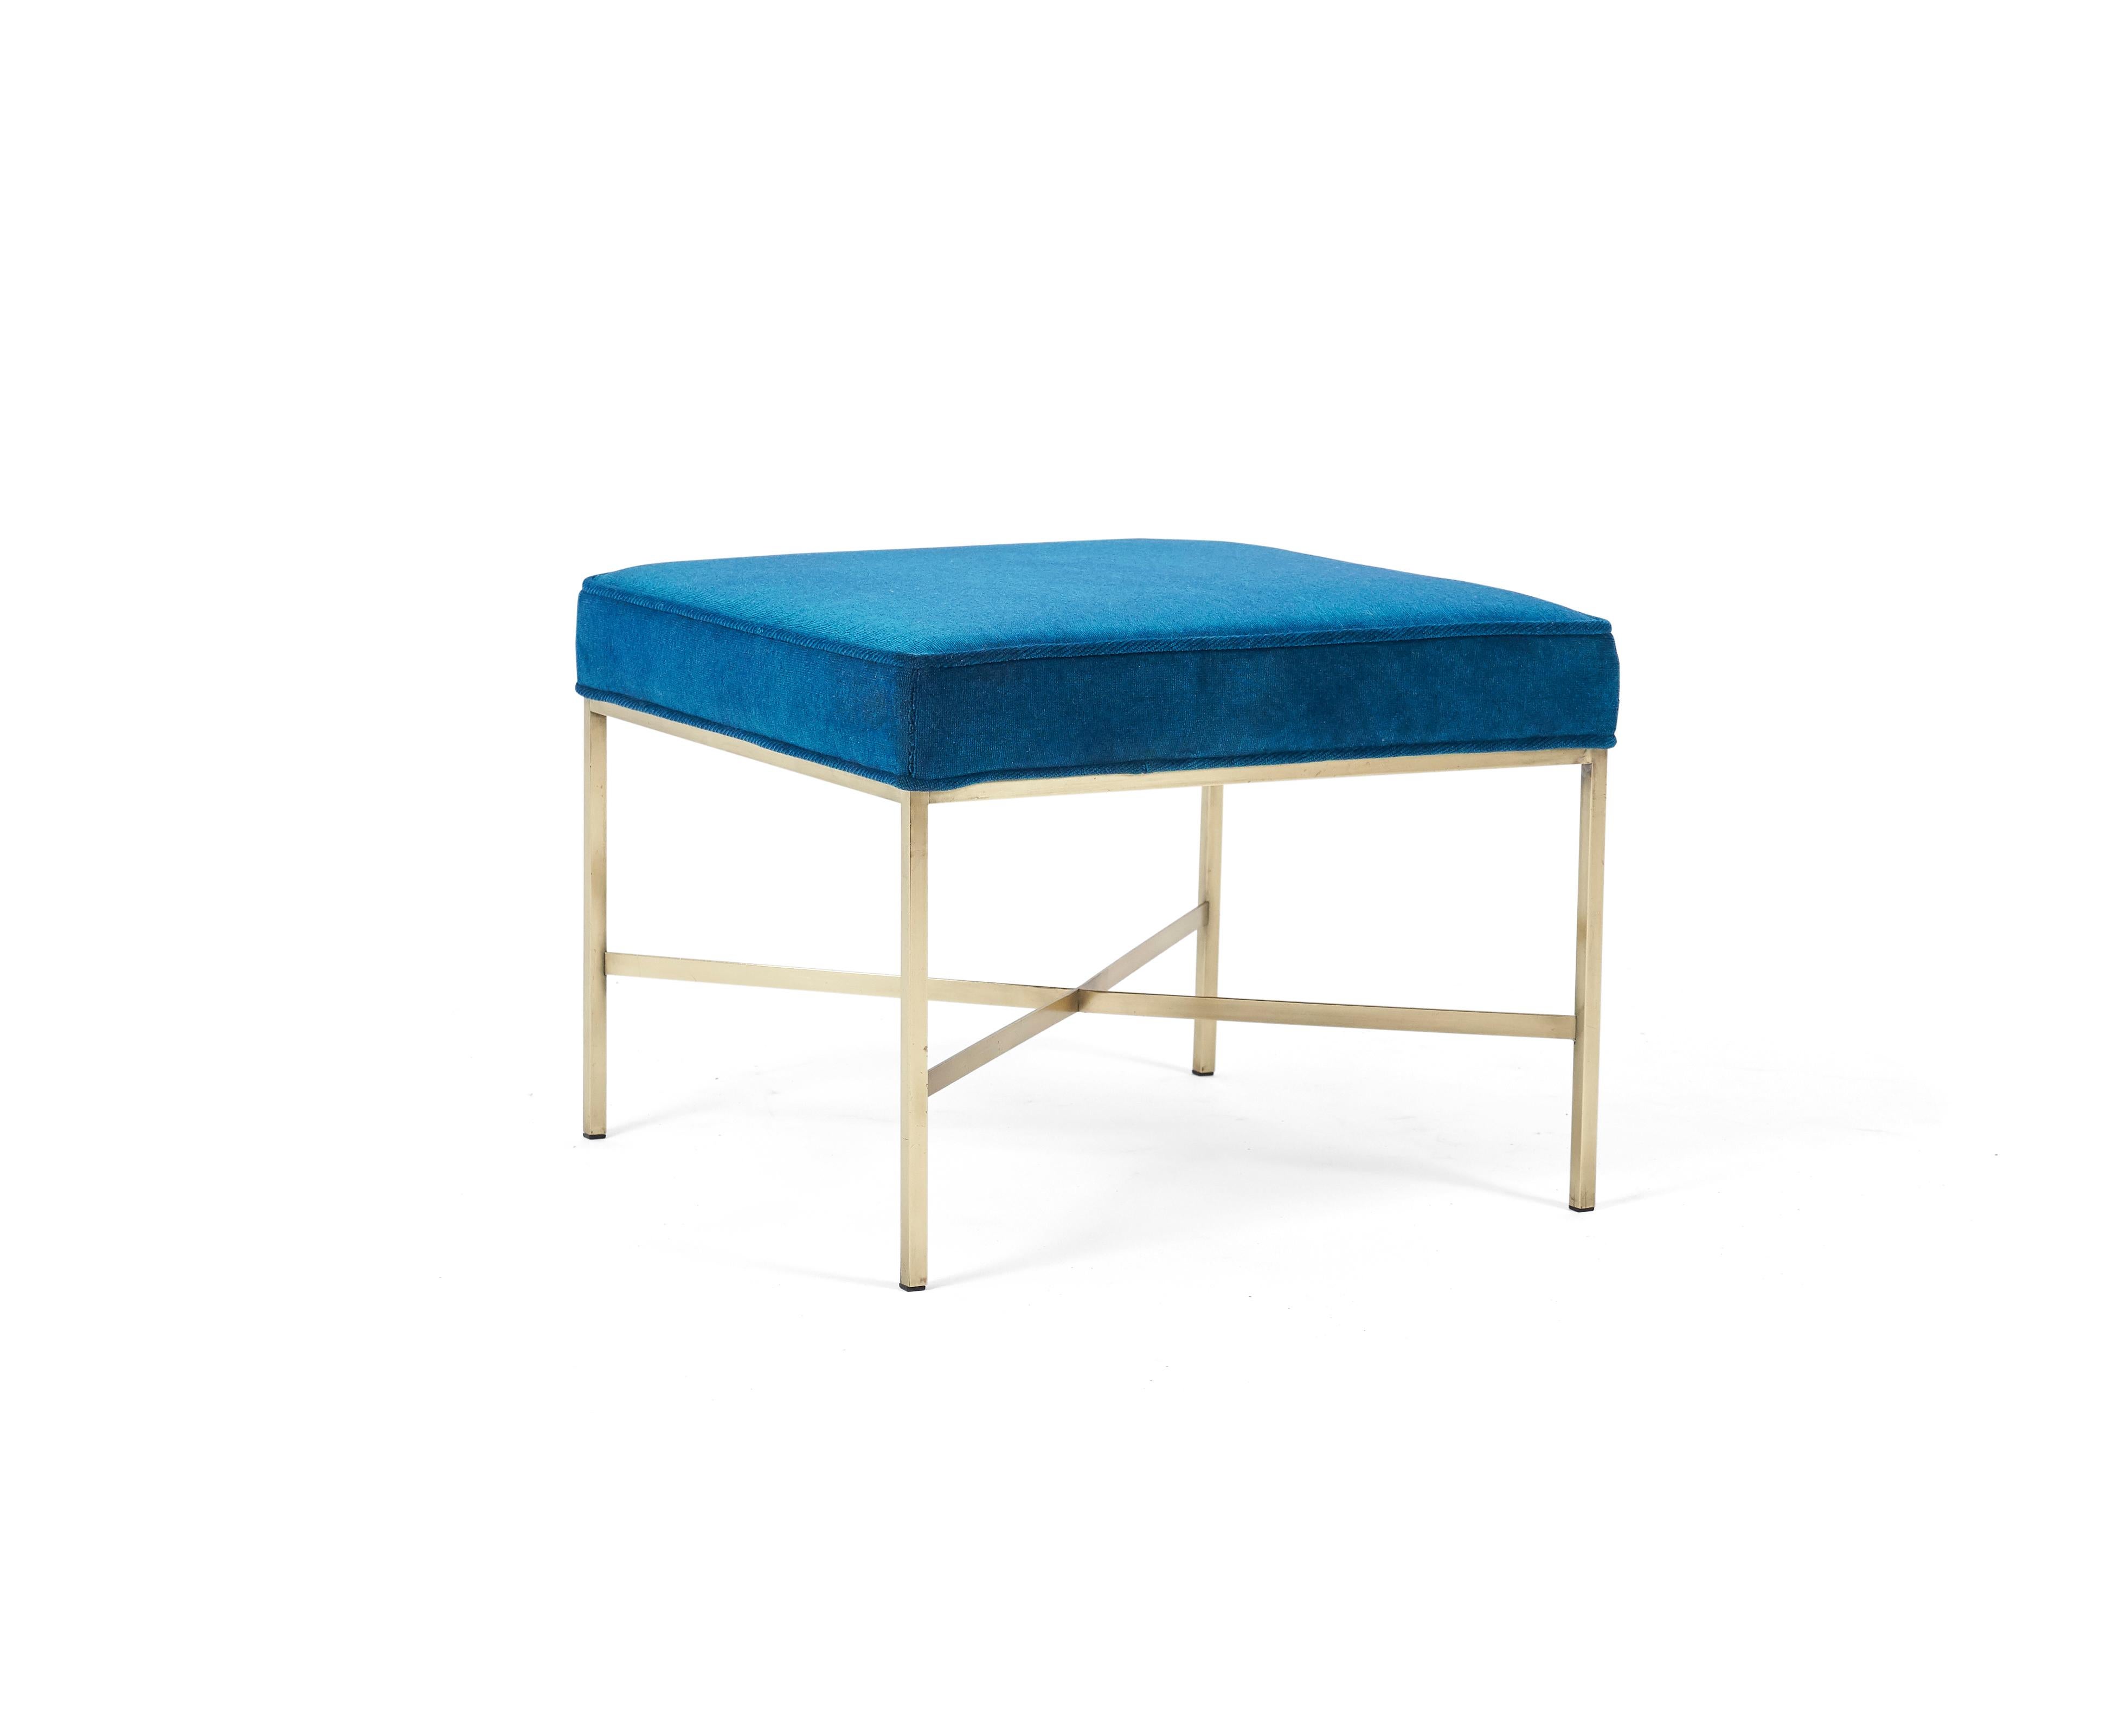 Brass X-base stool by Paul McCobb for Calvin Furniture. New cushions covered in new velvet, over polished brass base.